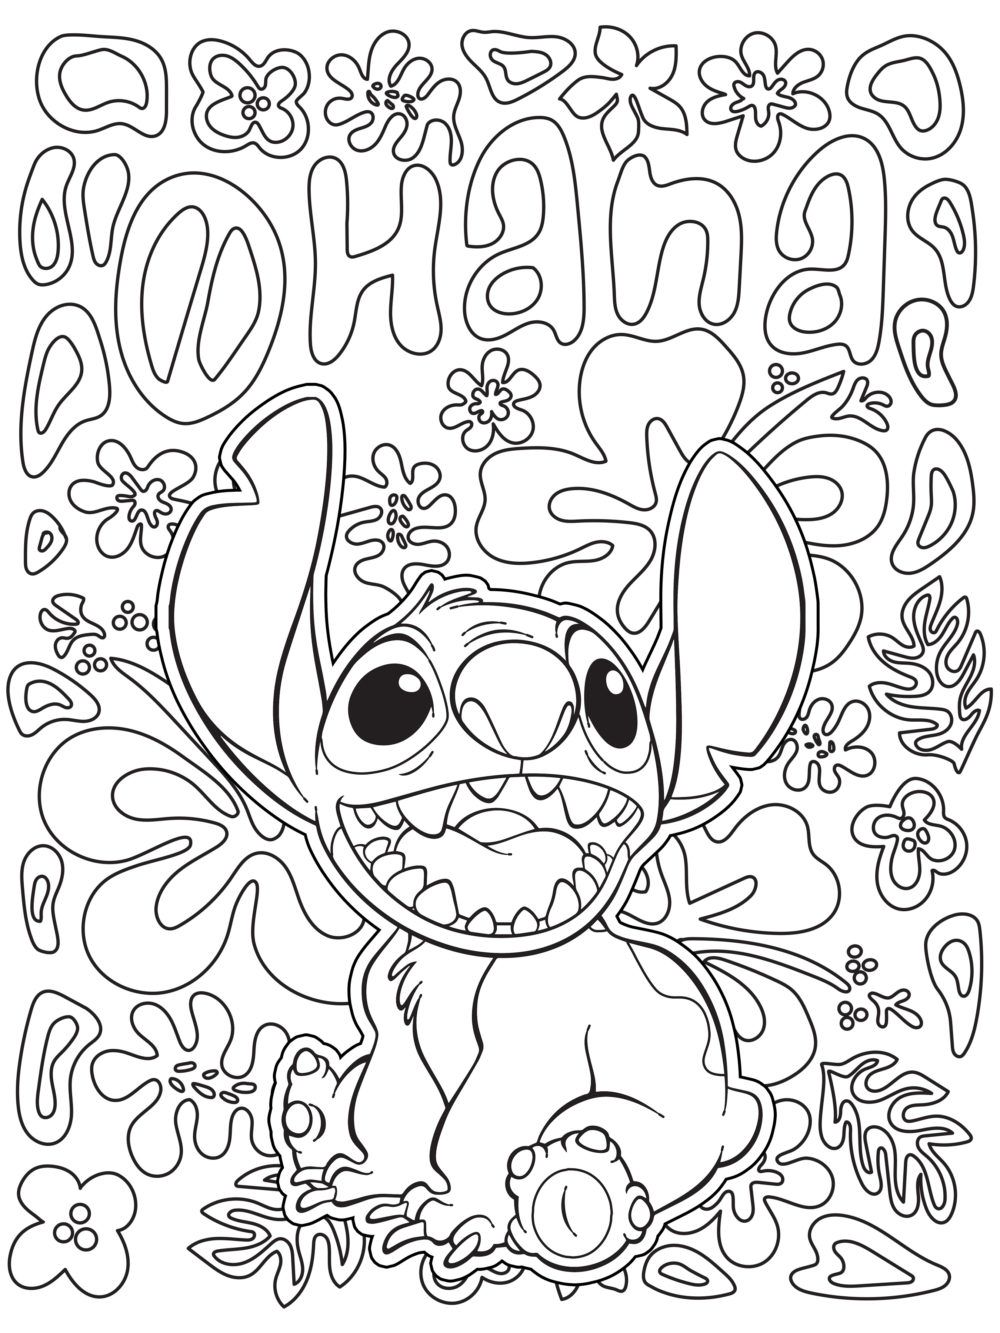 Disney Coloring Pages for Adults   Best Coloring Pages For ...